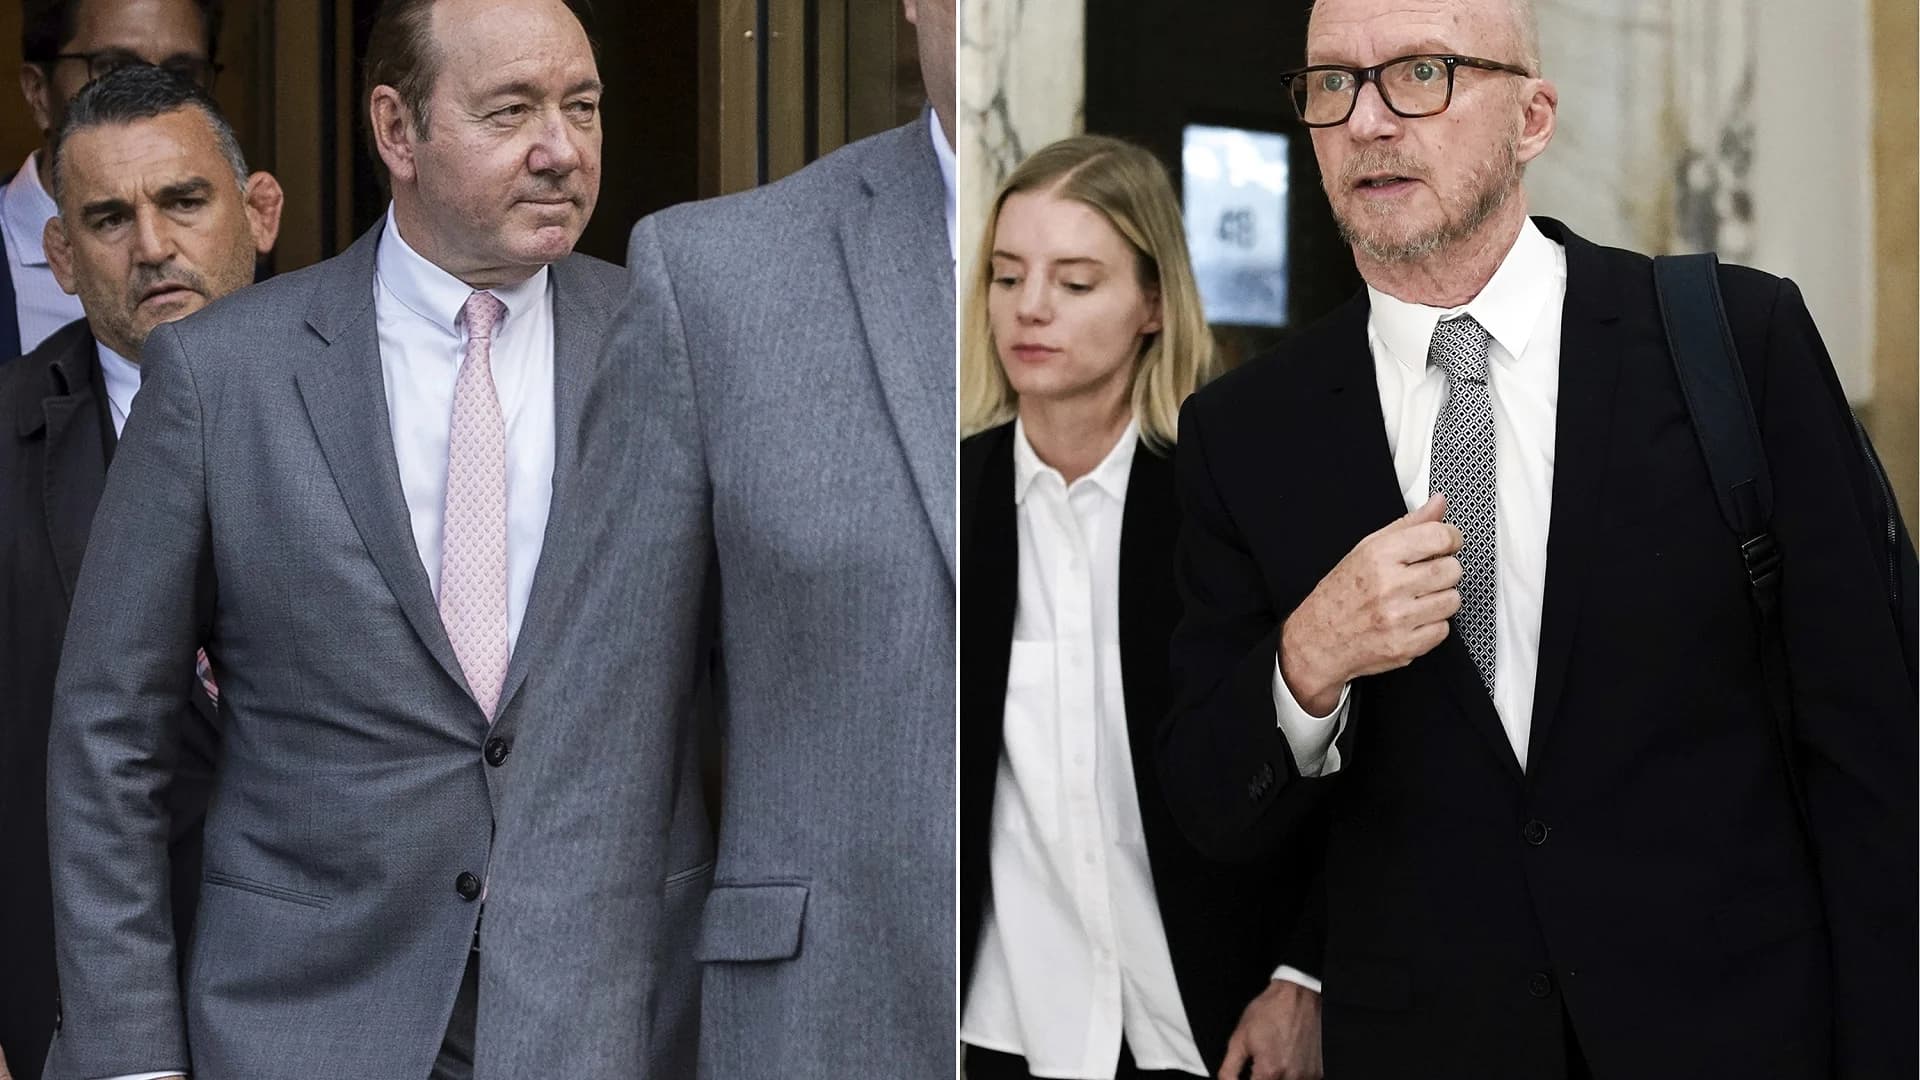 Jury: Kevin Spacey didn't molest actor Anthony Rapp in 1986